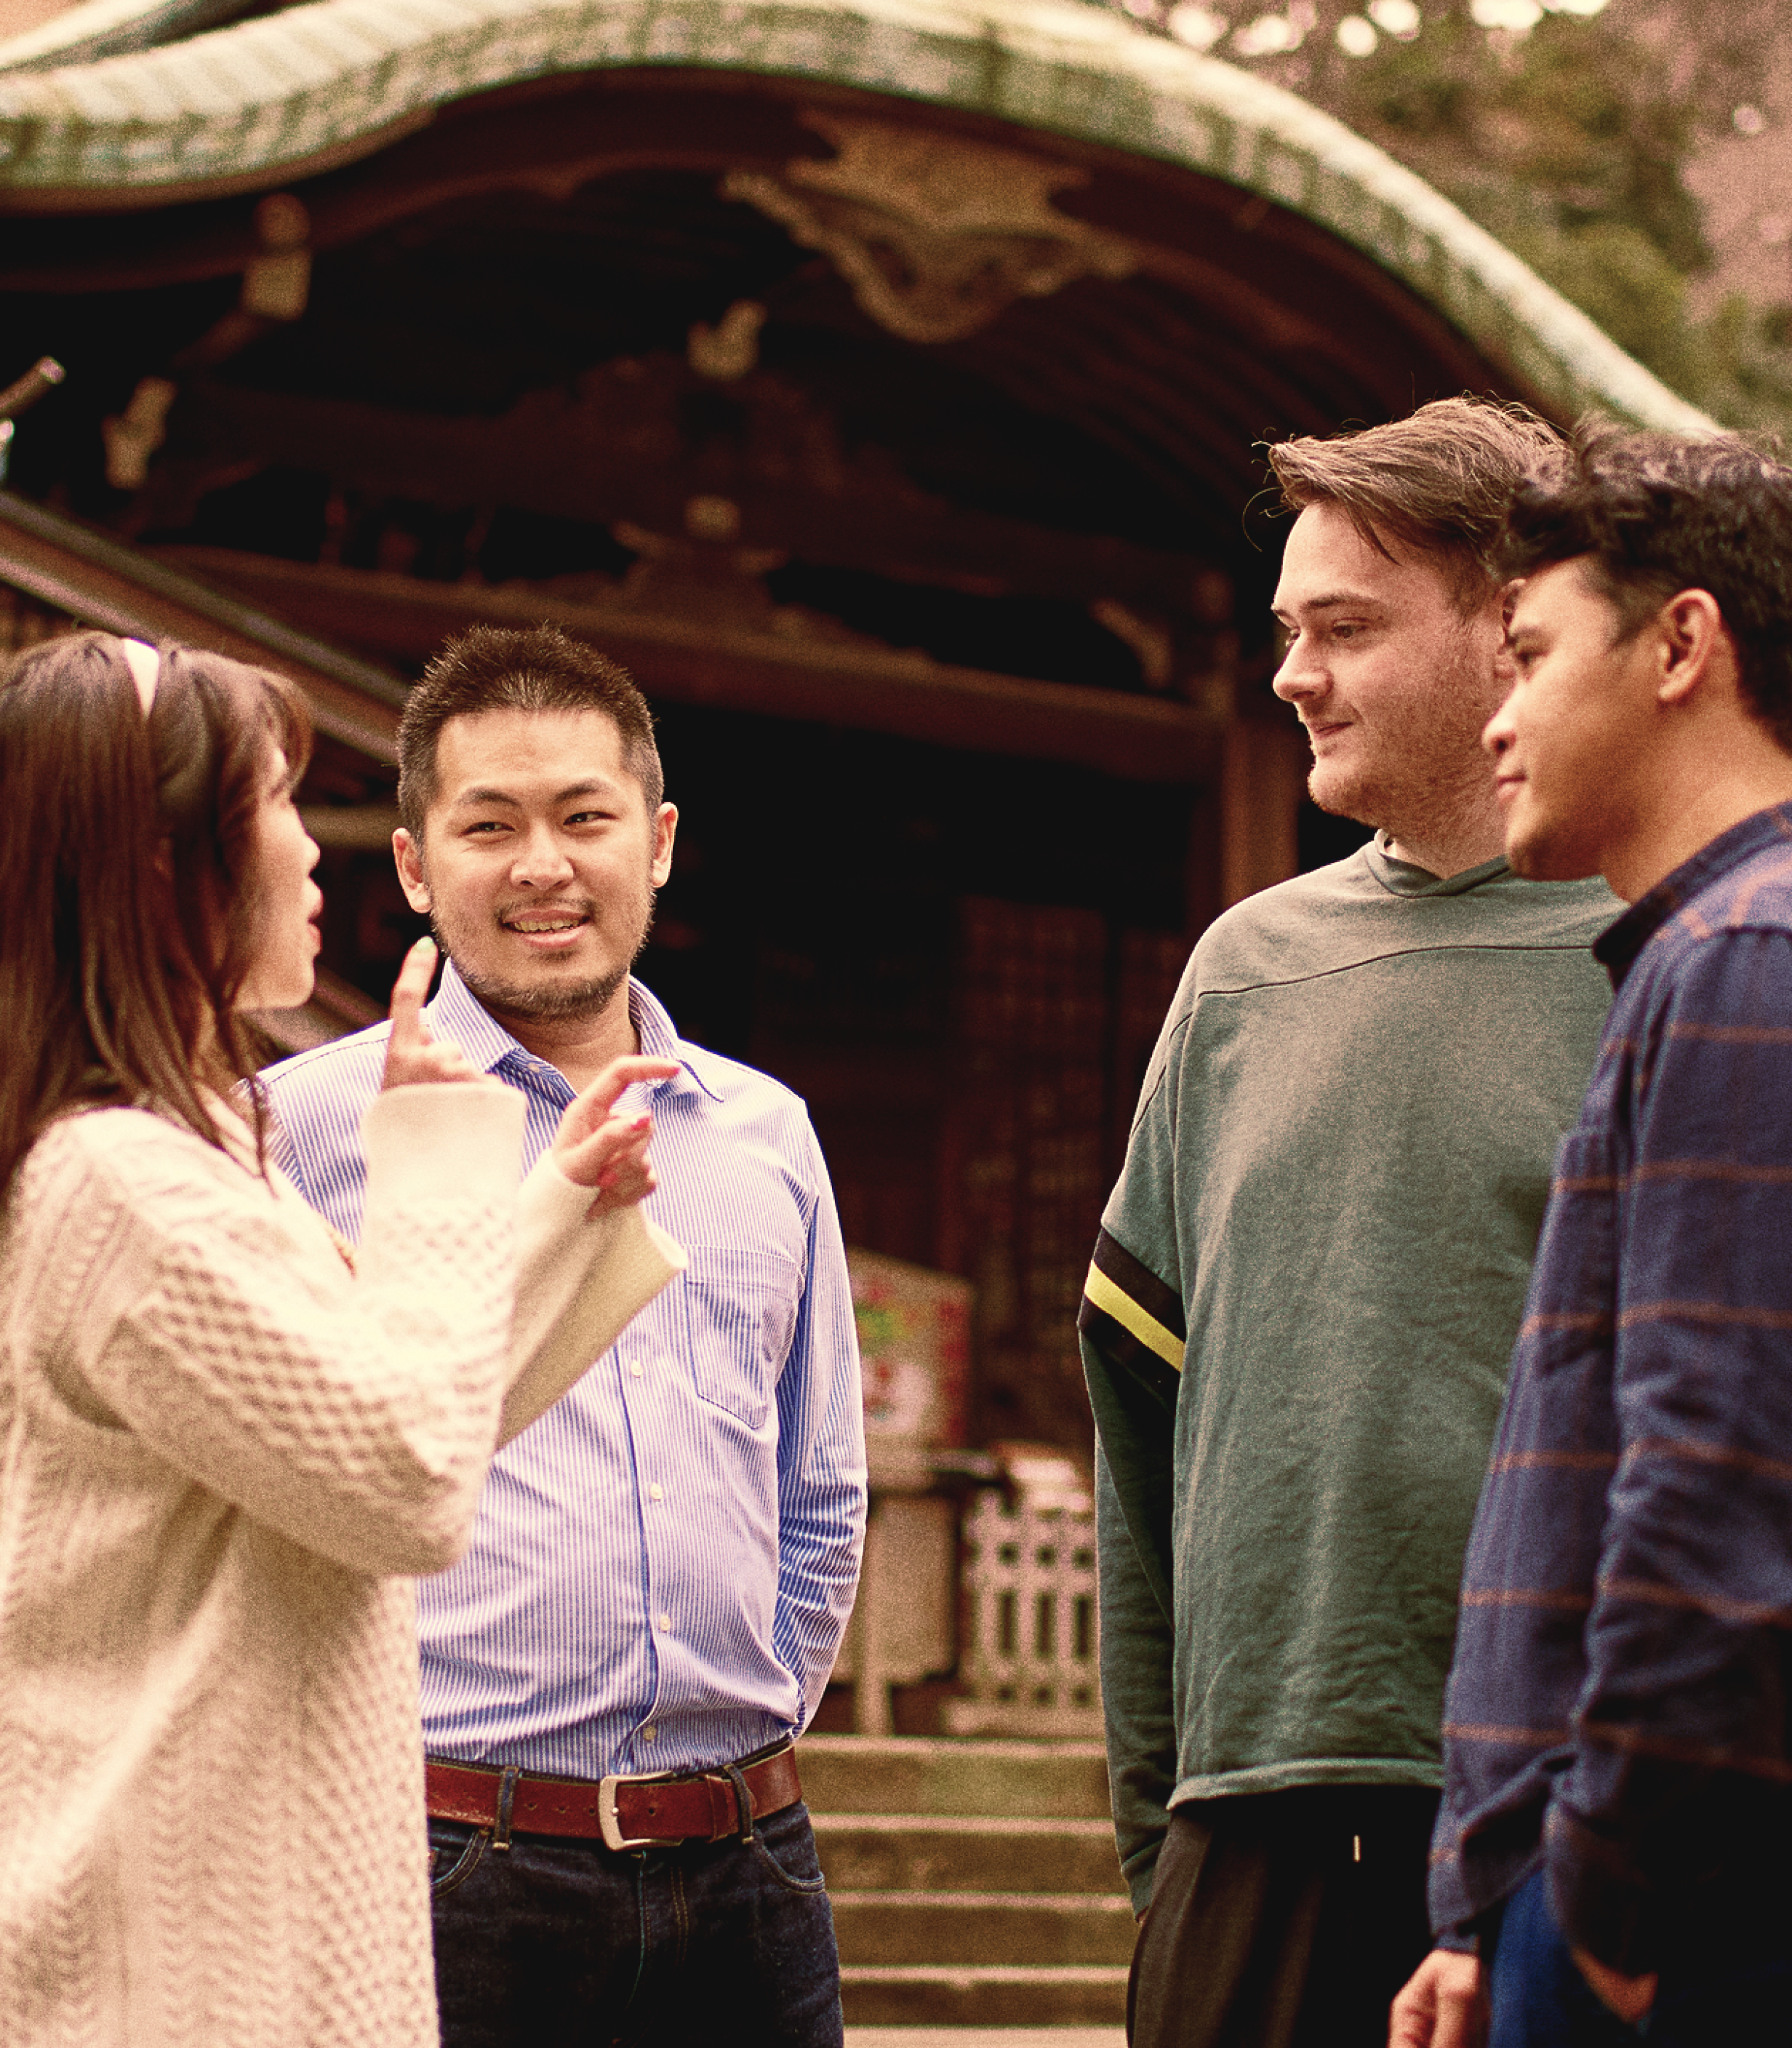 A diverse group of people having a discussion in a Japanese shrine